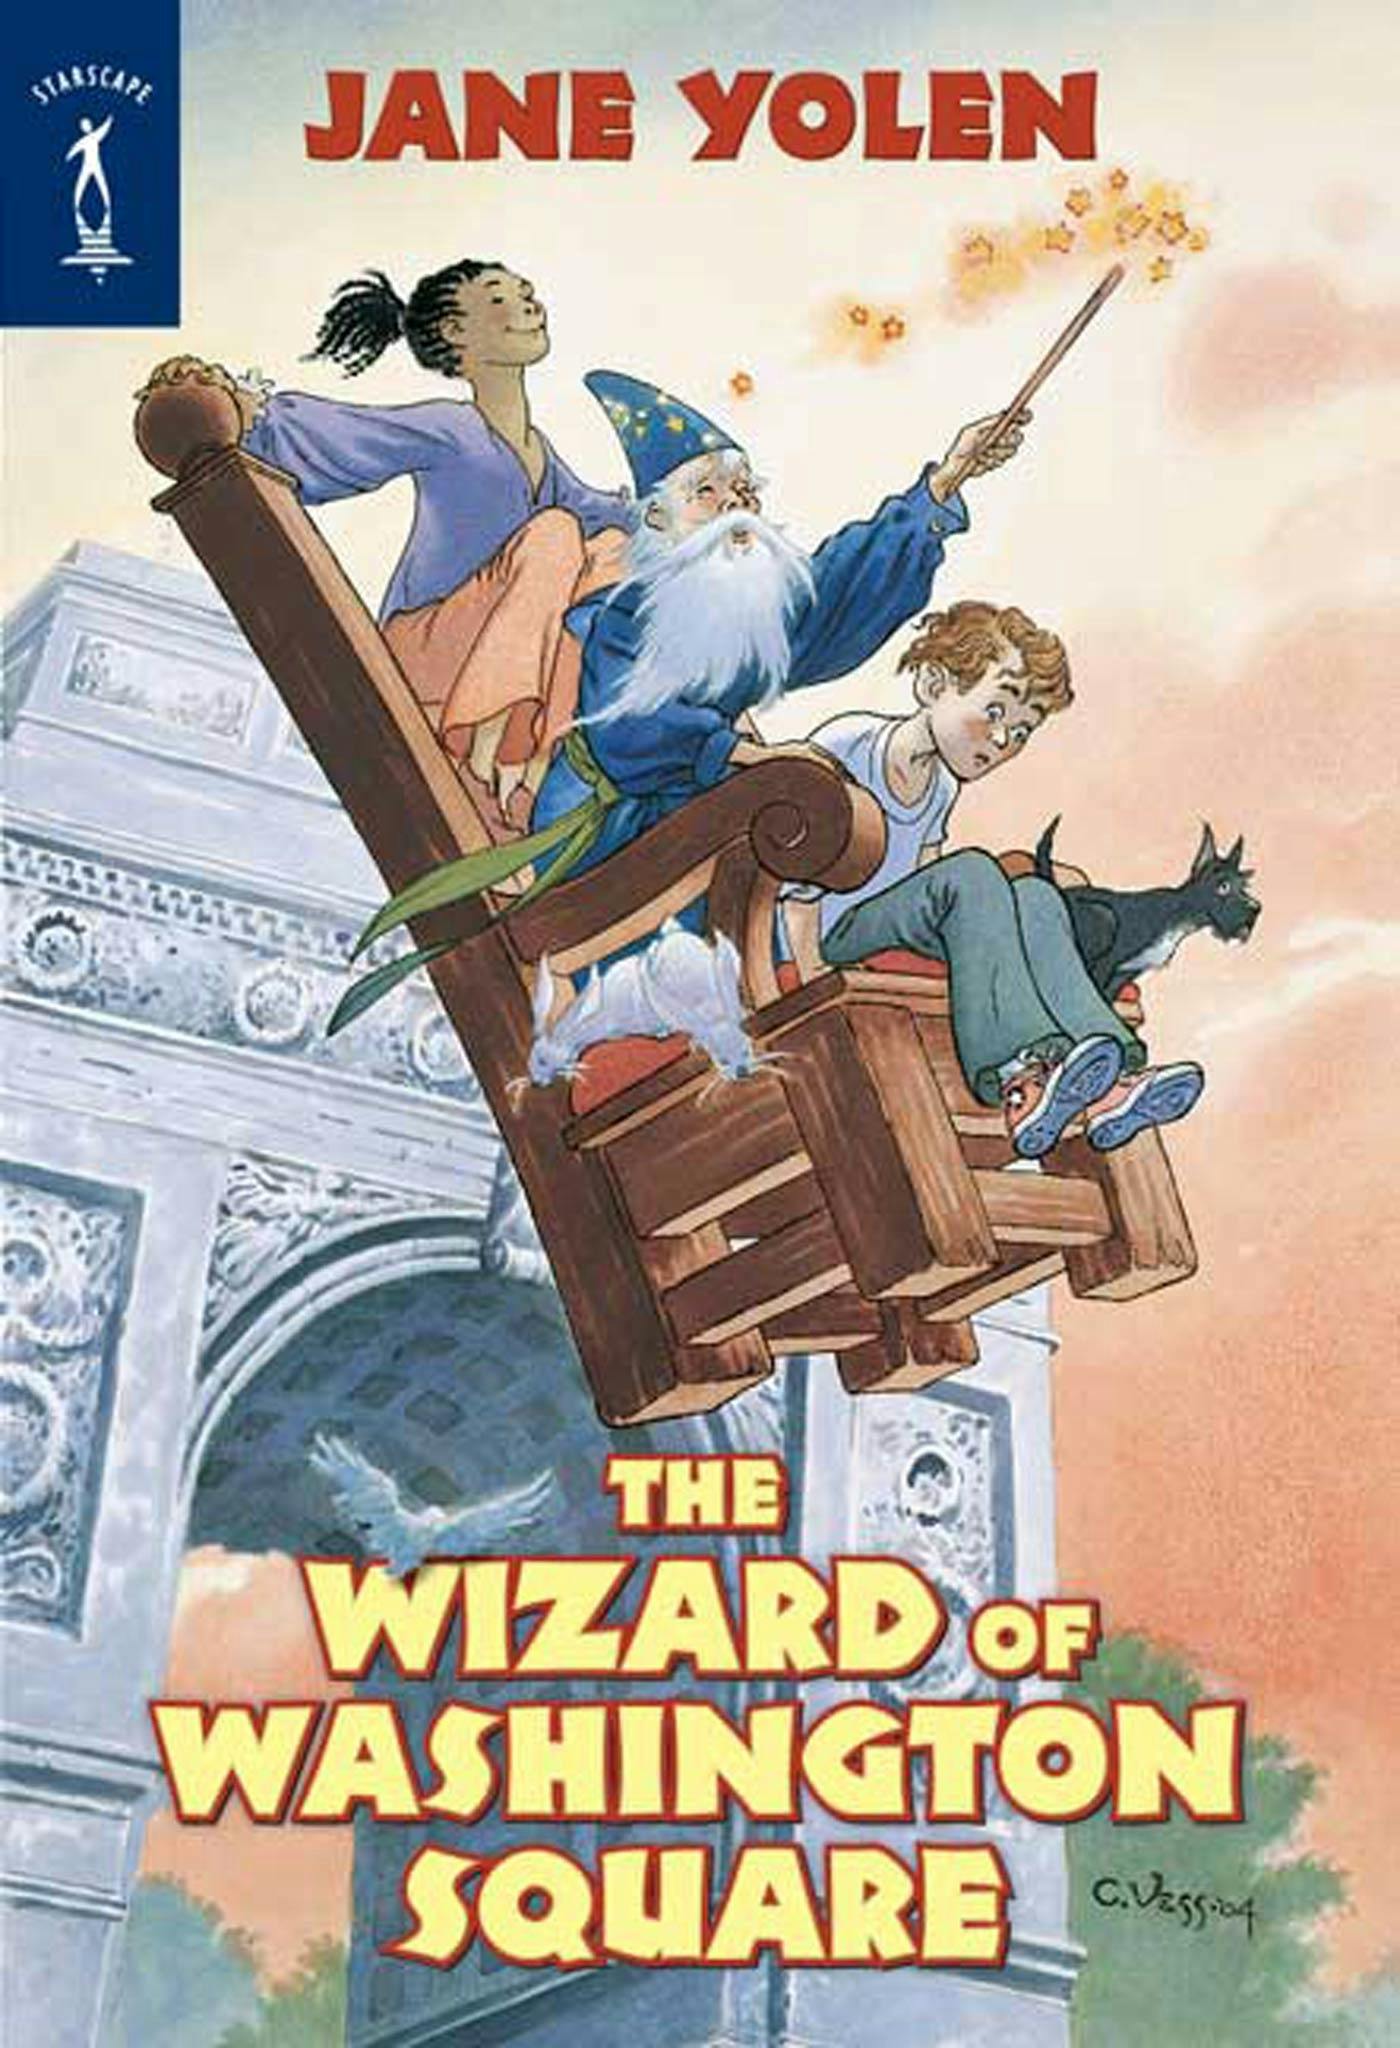 Cover for the book titled as: The Wizard of Washington Square